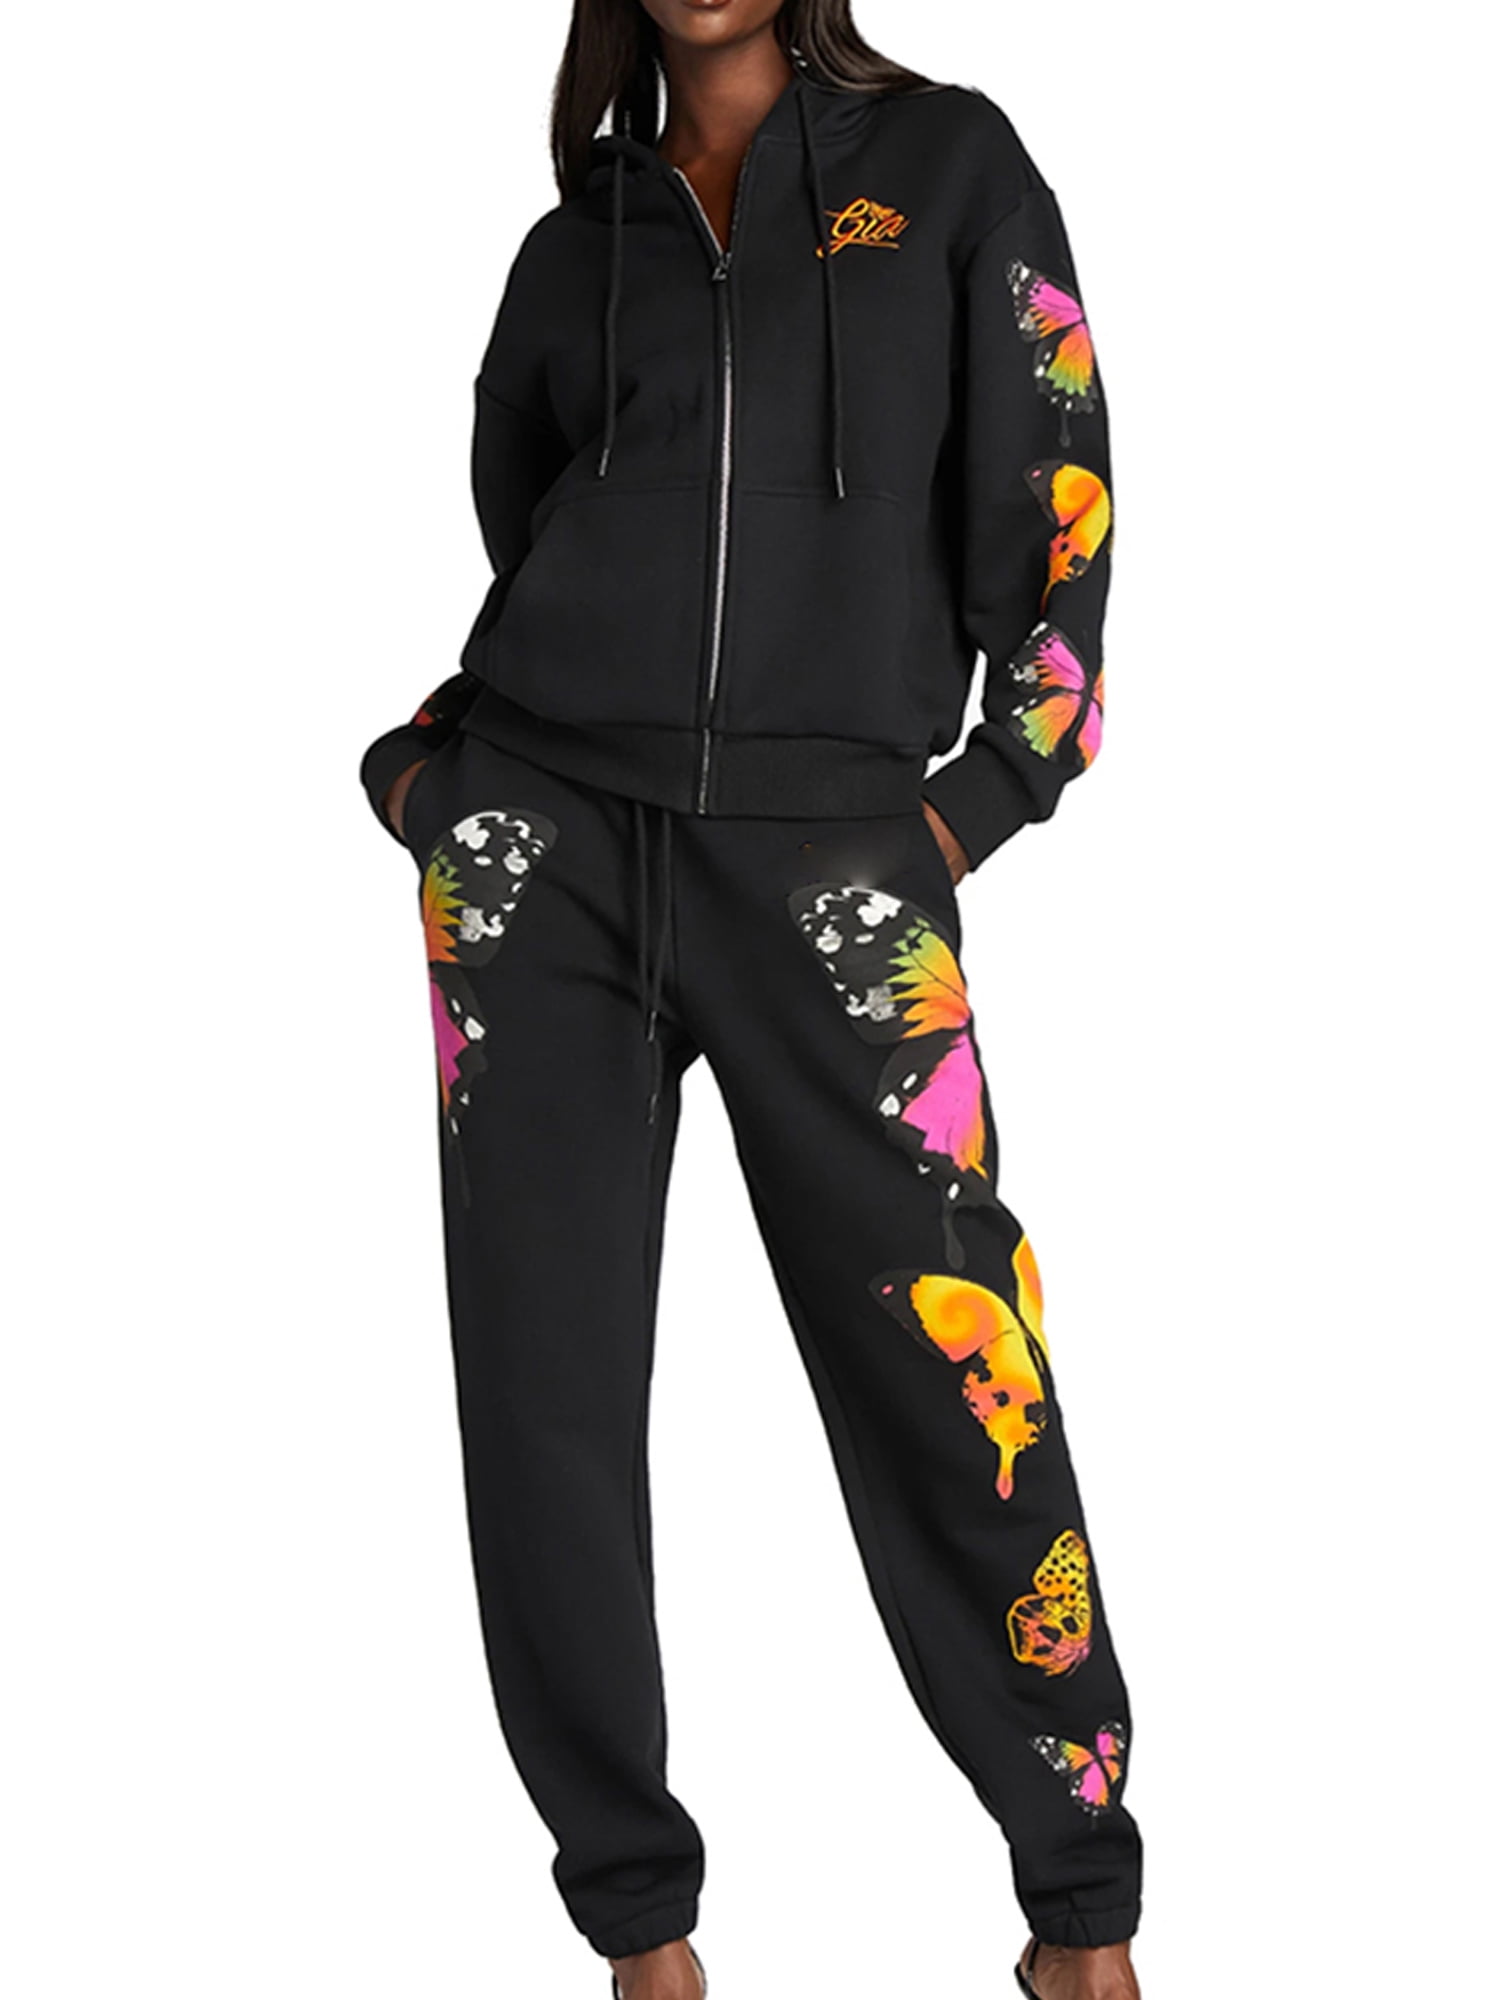 TIK ToK Hoodie and Pant Set Unisex Sweater Pants Fashion Trendy Printed Clothes